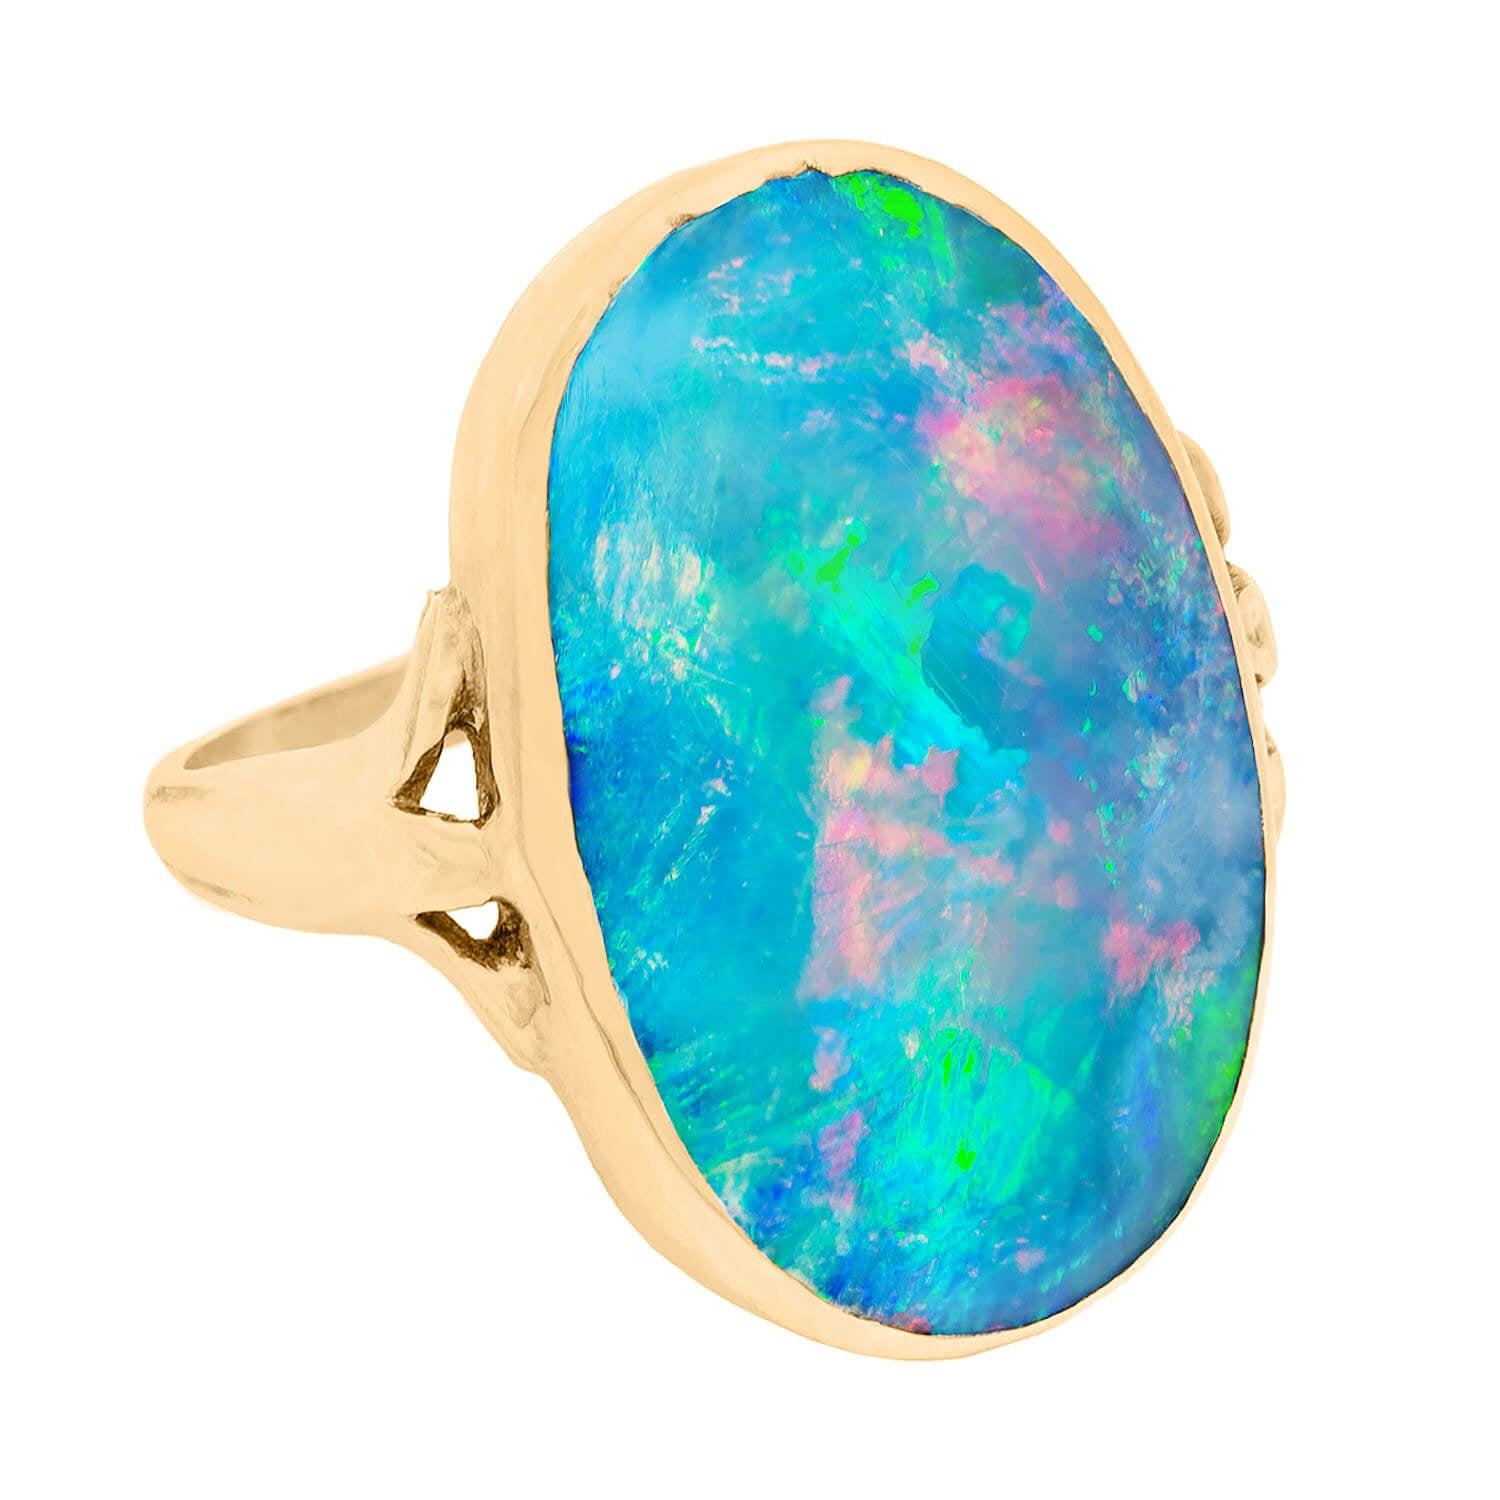 Black opals are the most rare and valuable of all natural opal varieties. These amazing stones exhibit amazing color backed by dark or black 